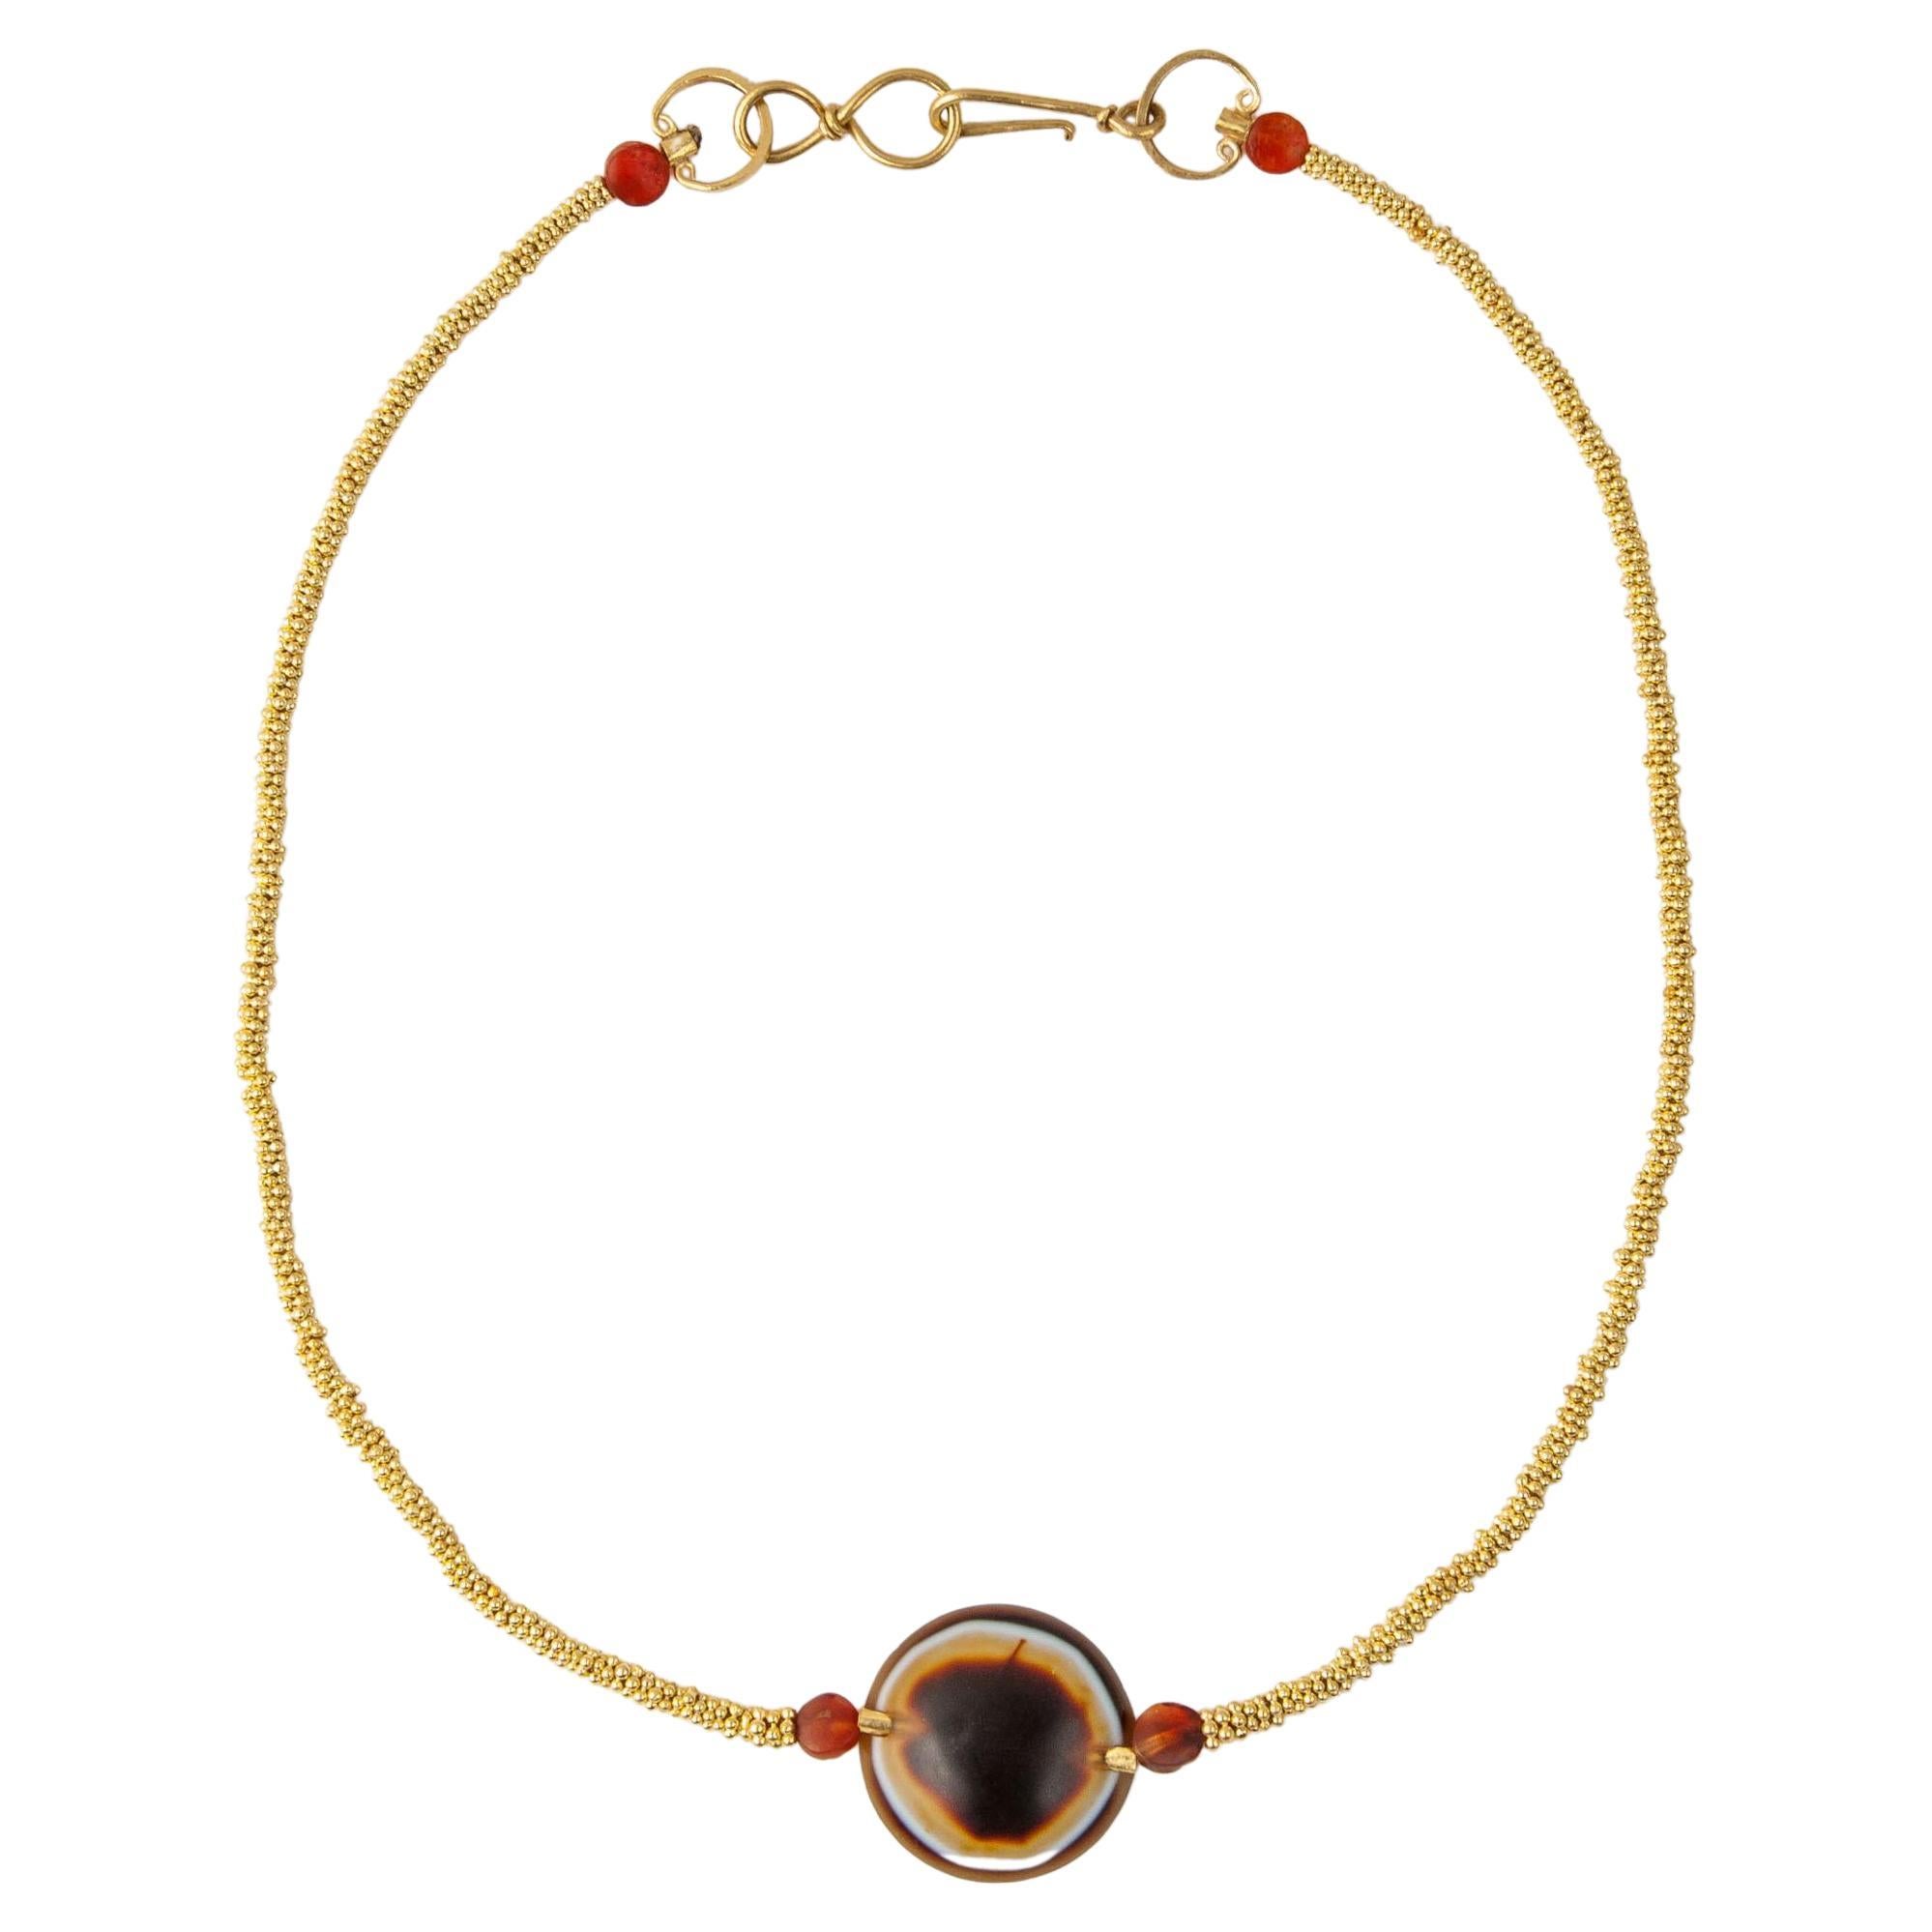 Ancient Agate "Eye" Bead with Carnelian and 20k Granulated Gold Beads For Sale